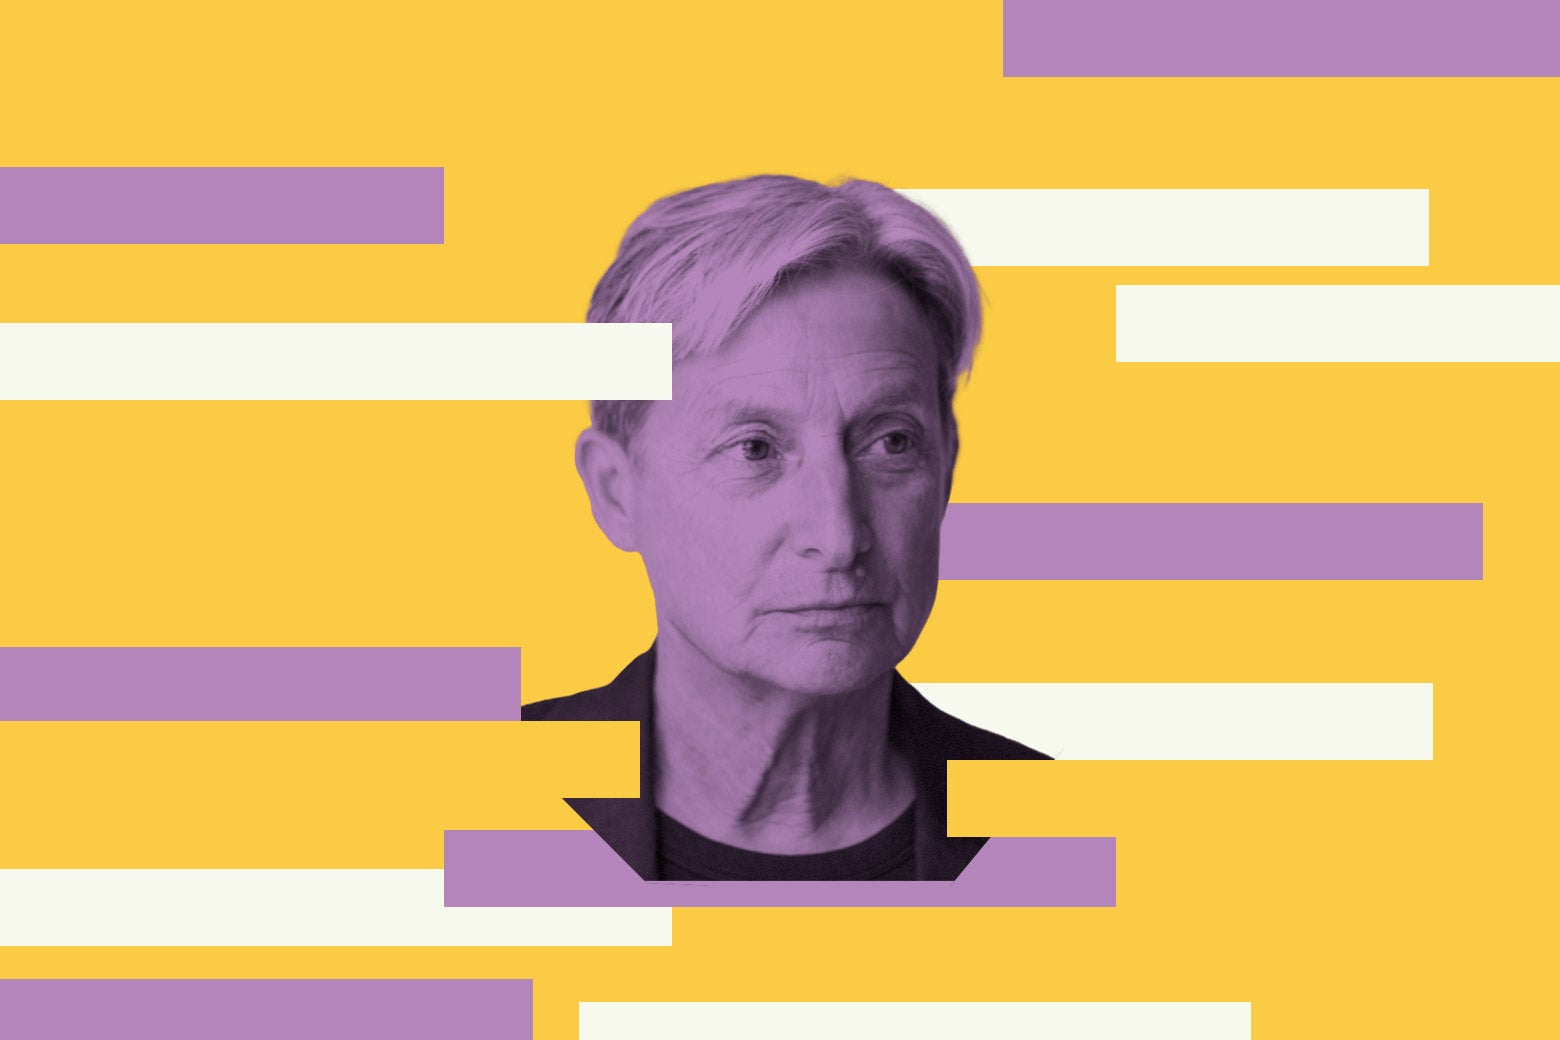 Judith Butler Saved My Career. Their New Book Is Filled With the Kindness They Showed Me. Dana Stevens